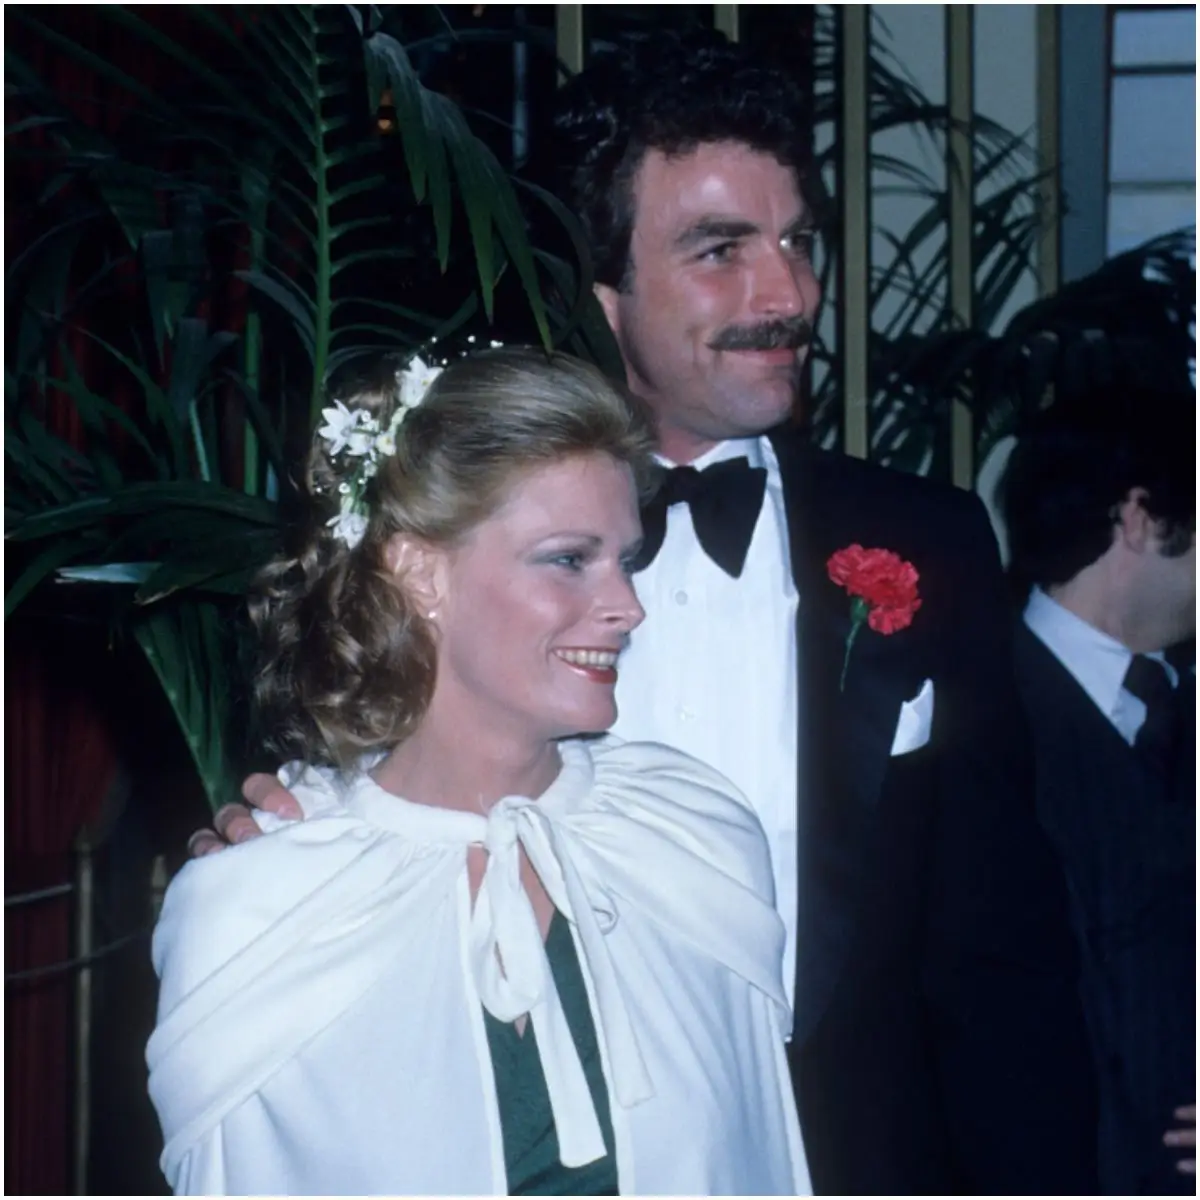 Tom Selleck and Jacqueline Ray